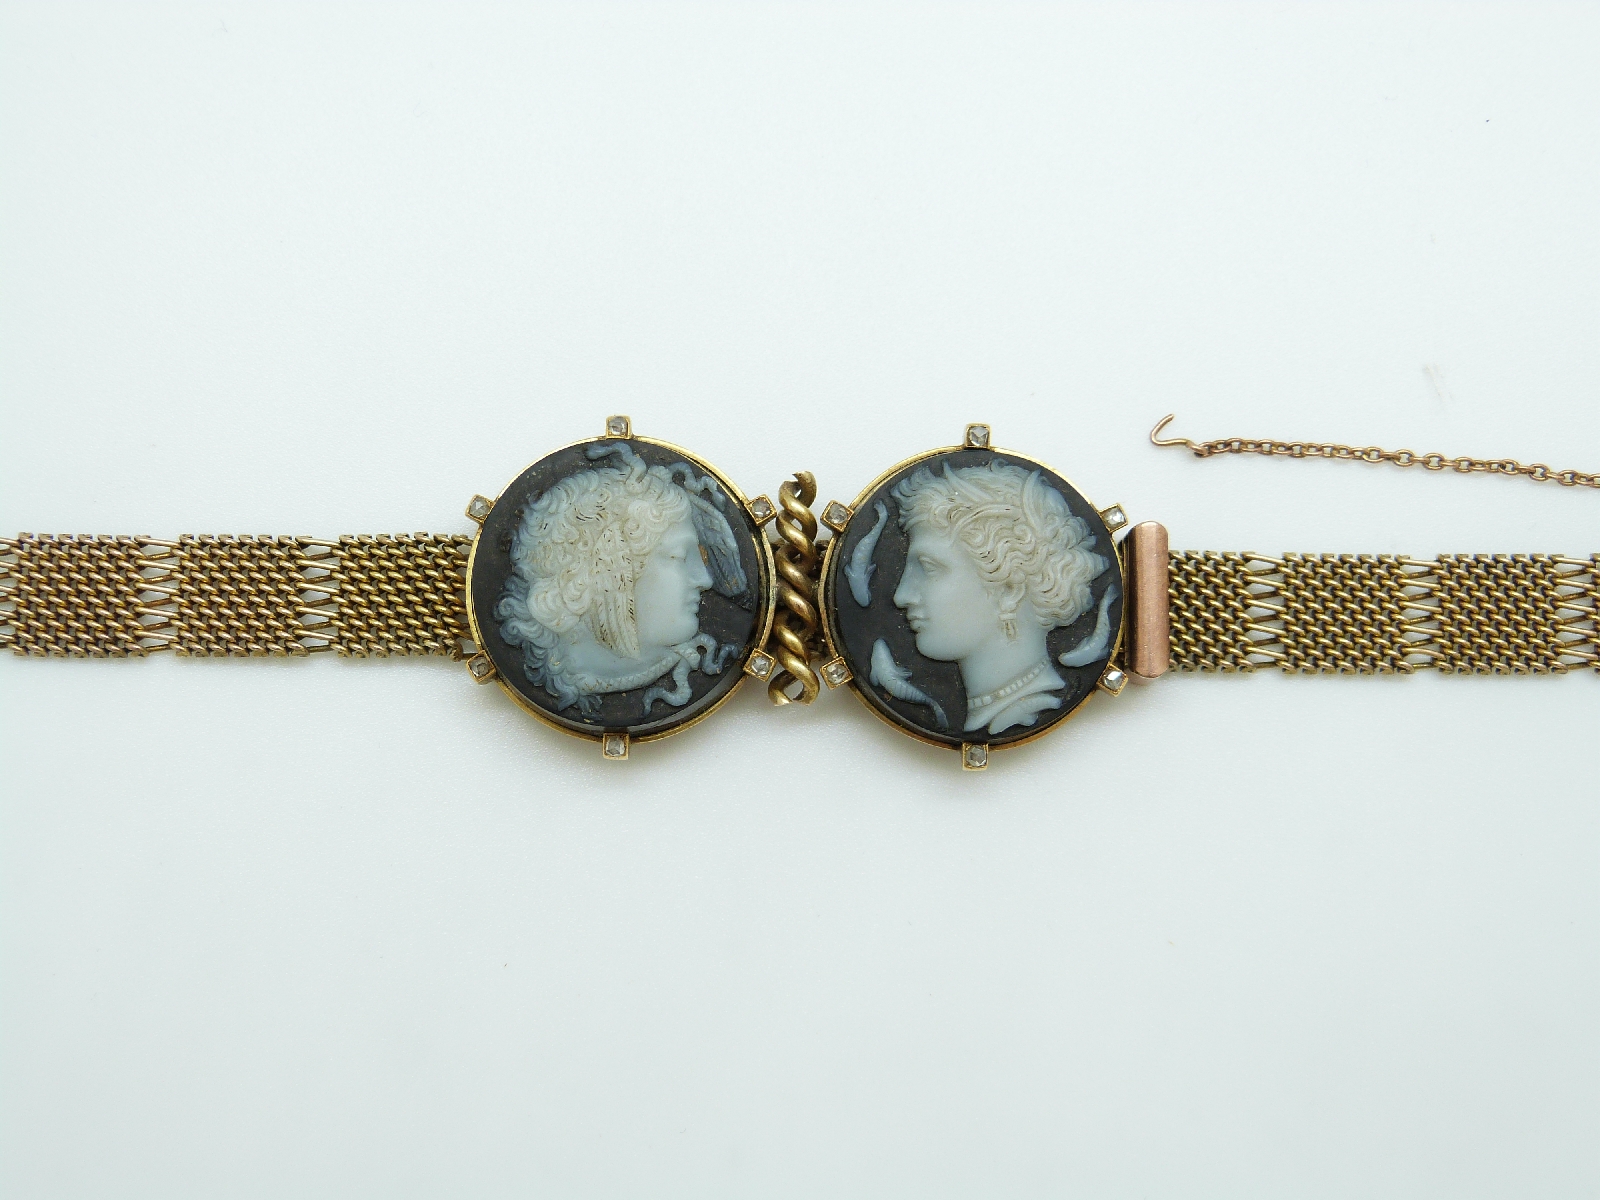 A 9ct gold Victorian bracelet set with two finely carved hardstone cameos depicting day and night, - Image 2 of 6